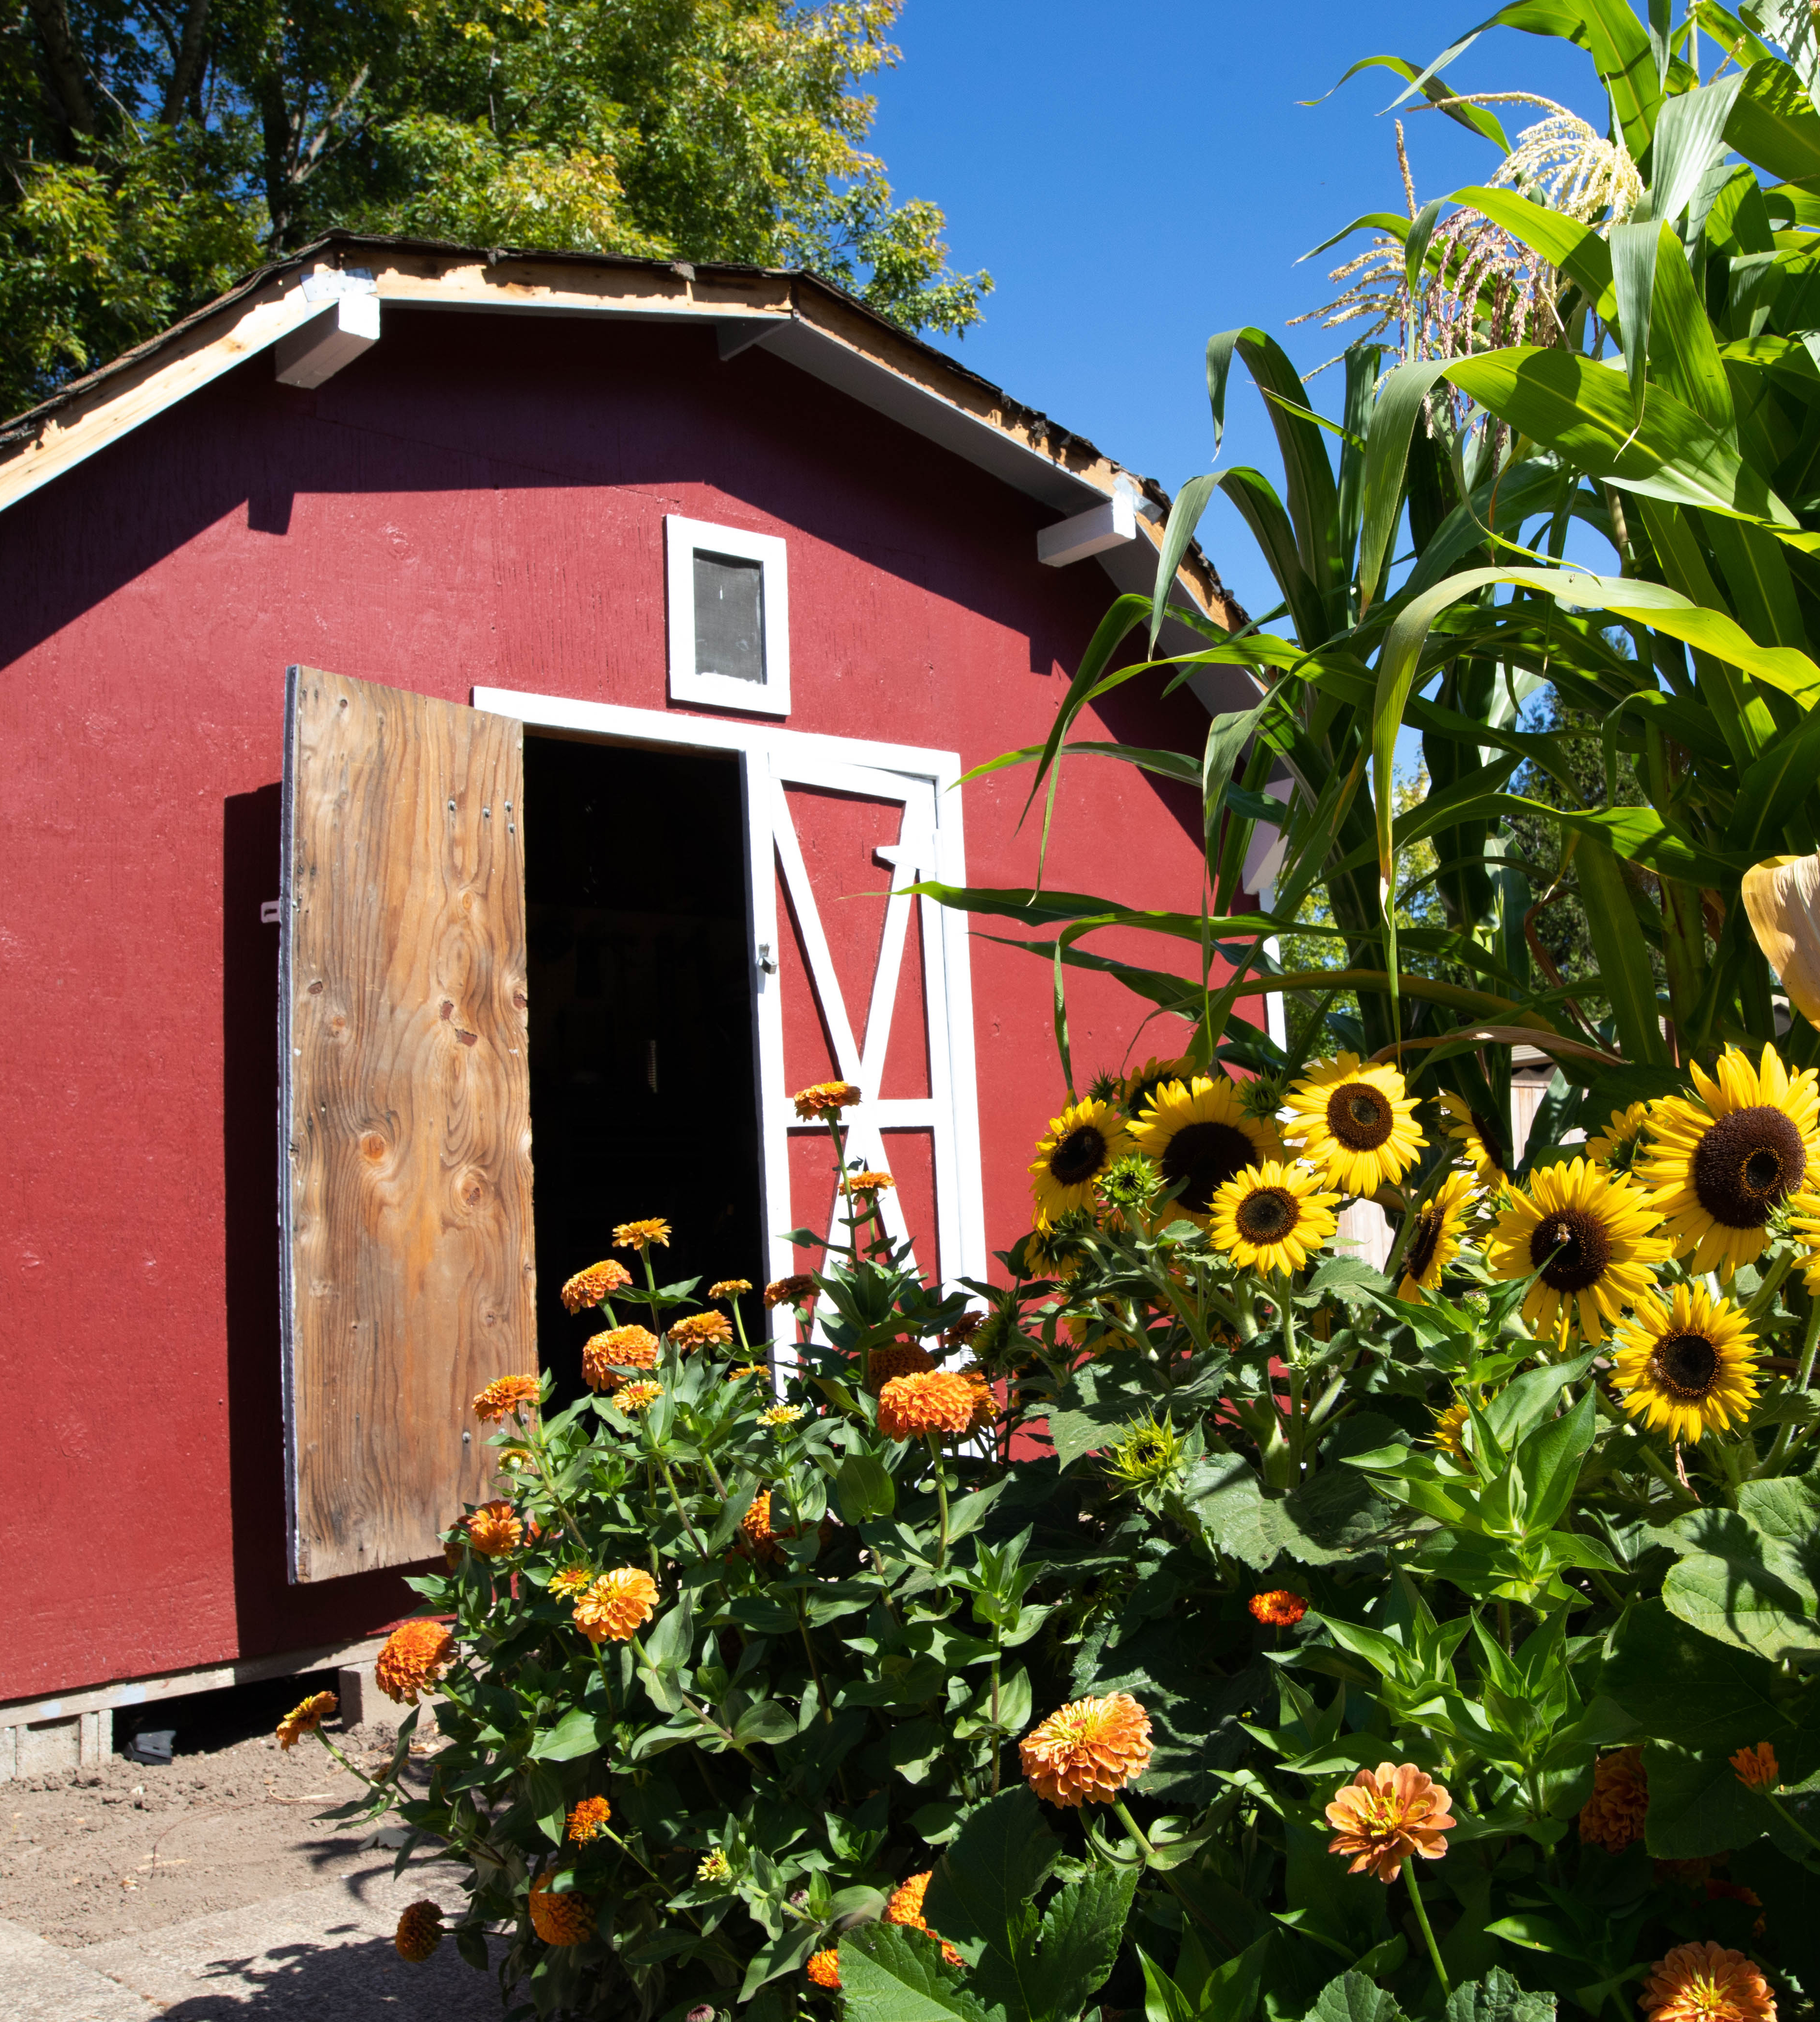 Sunflowers bloom in front of a red barn in the Boxer Gardens, part of the Center for a Sustainable Society at Pacific University